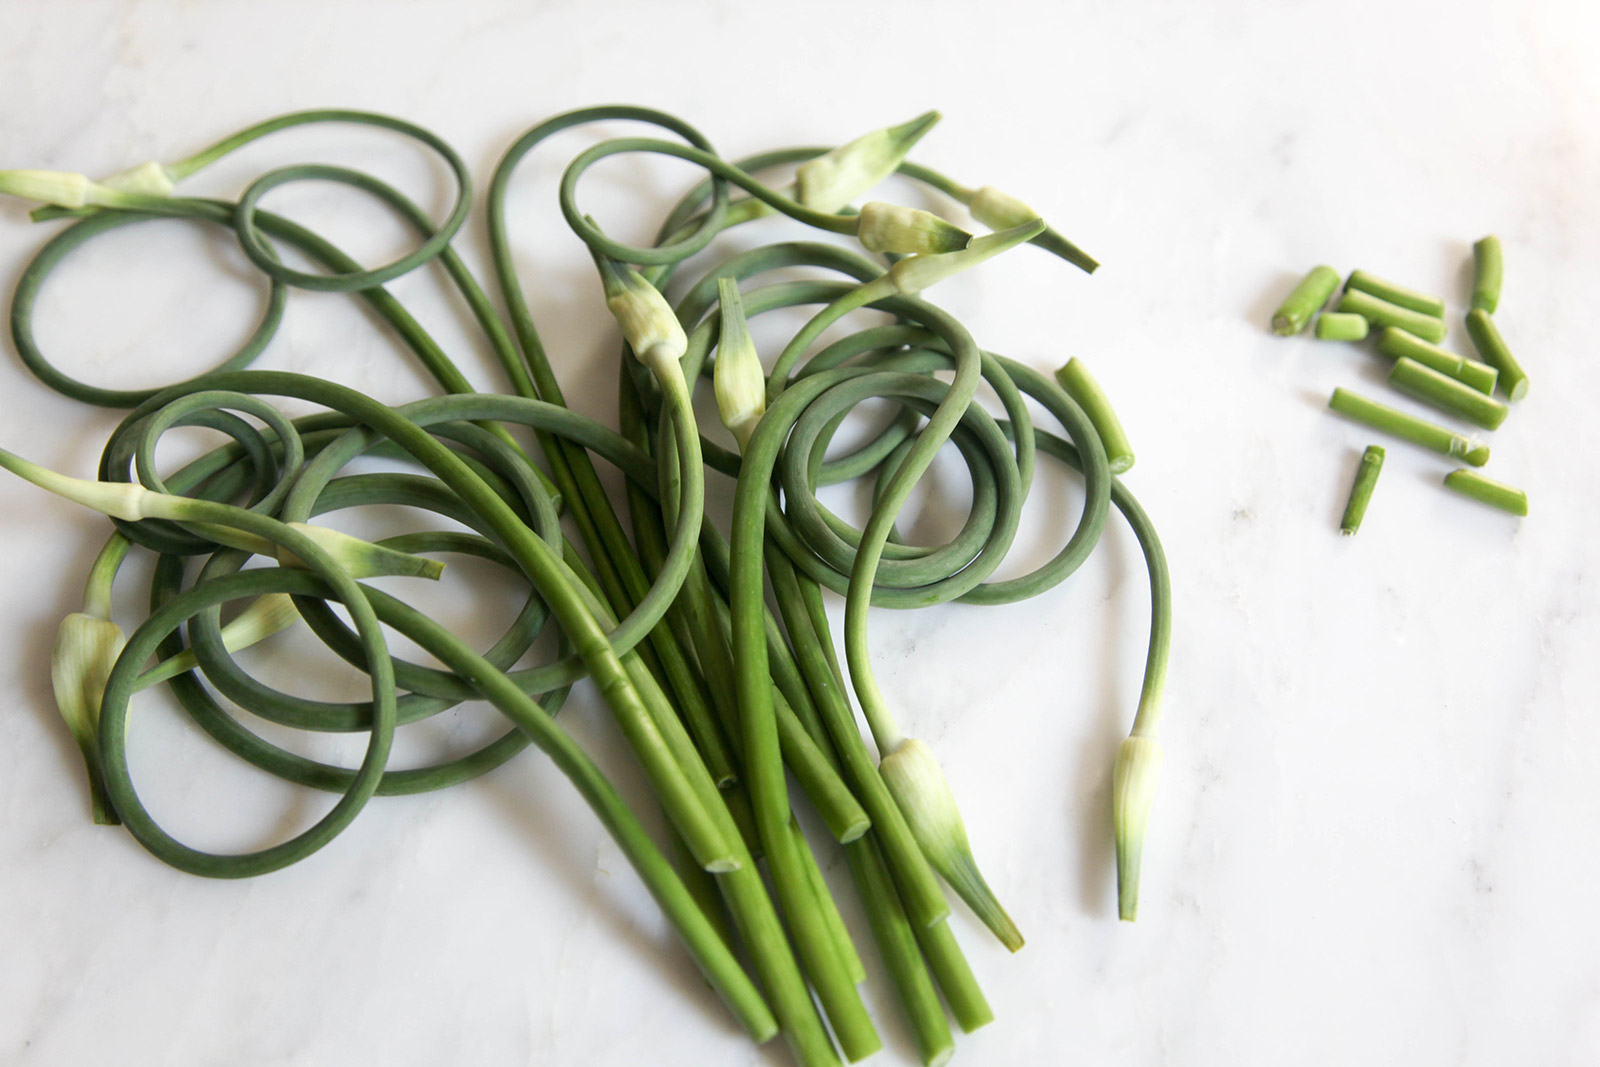 garlic scapes with bottoms snipped